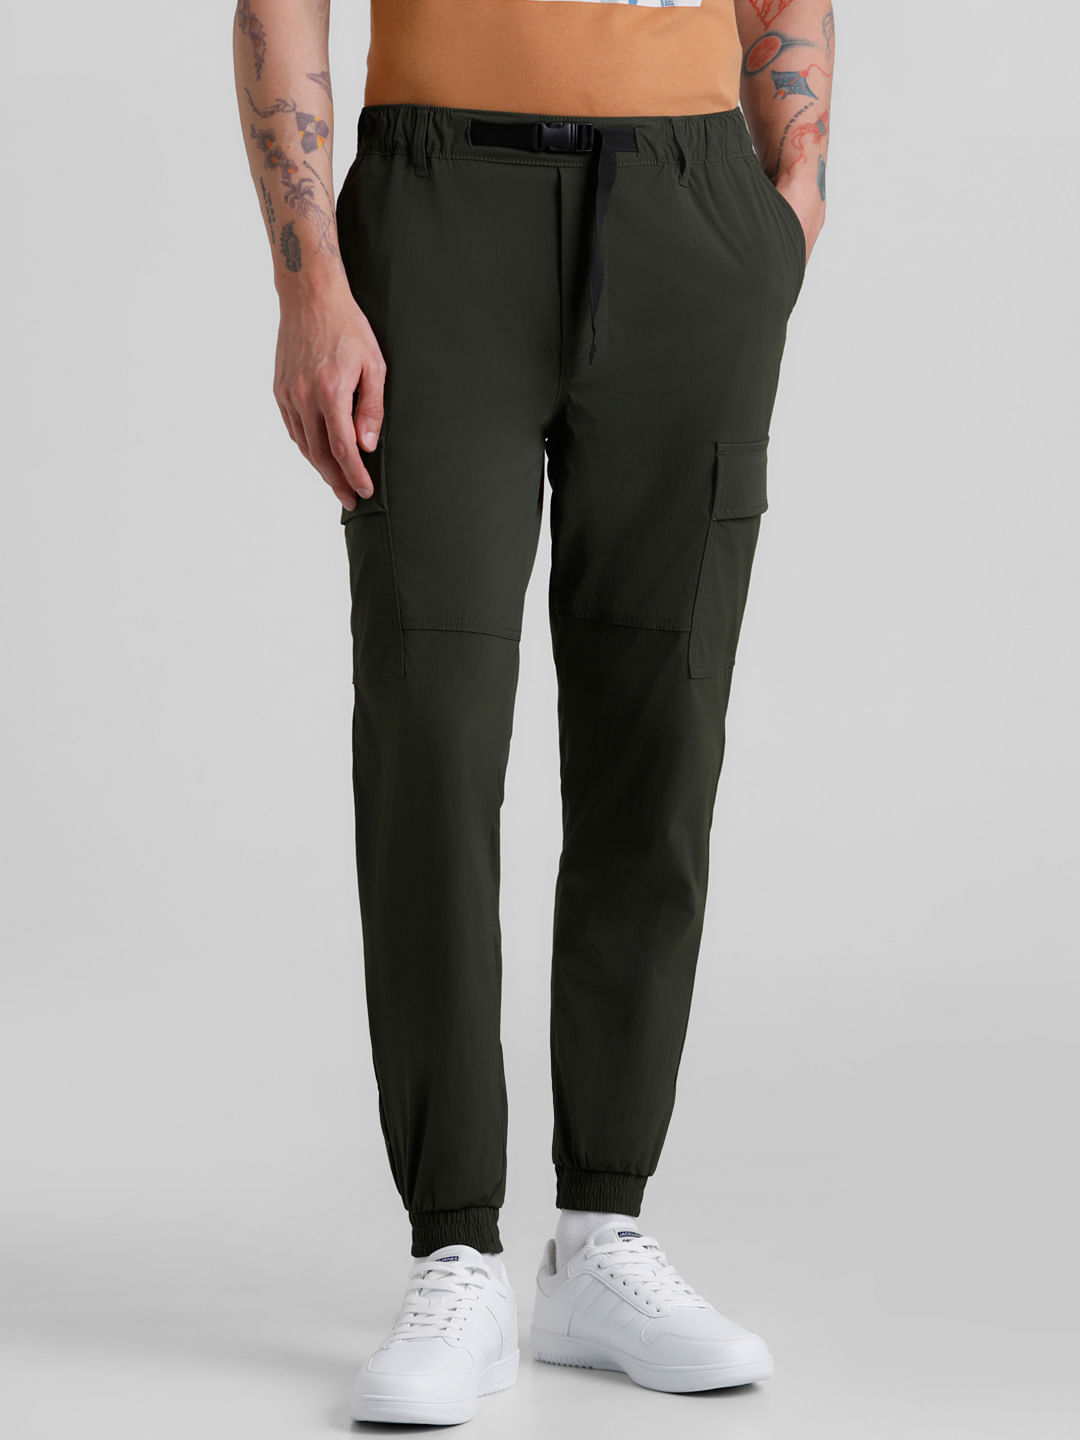 Cargo Trousers - Buy Cargo Trousers Online Starting at Just ₹373 | Meesho